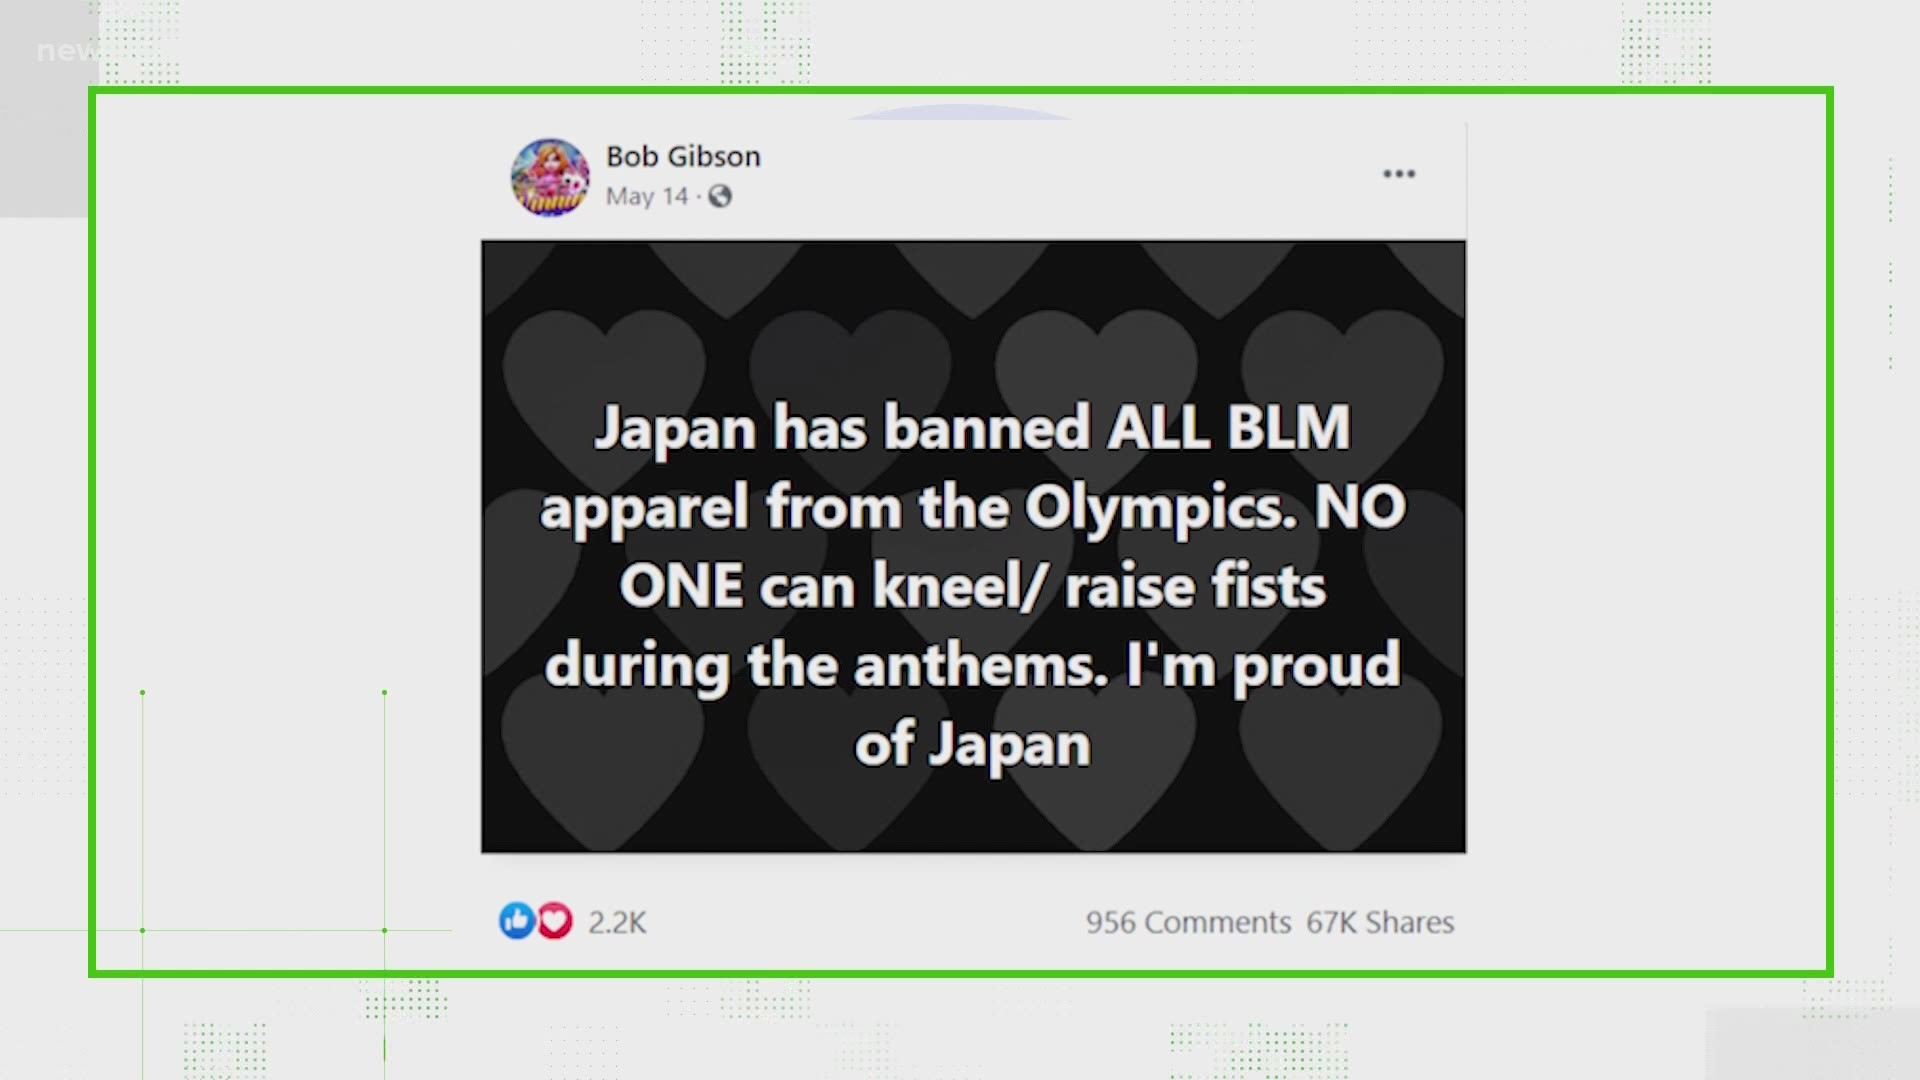 While certain displays are not allowed during the Olympics, that is not the decision of Japan.